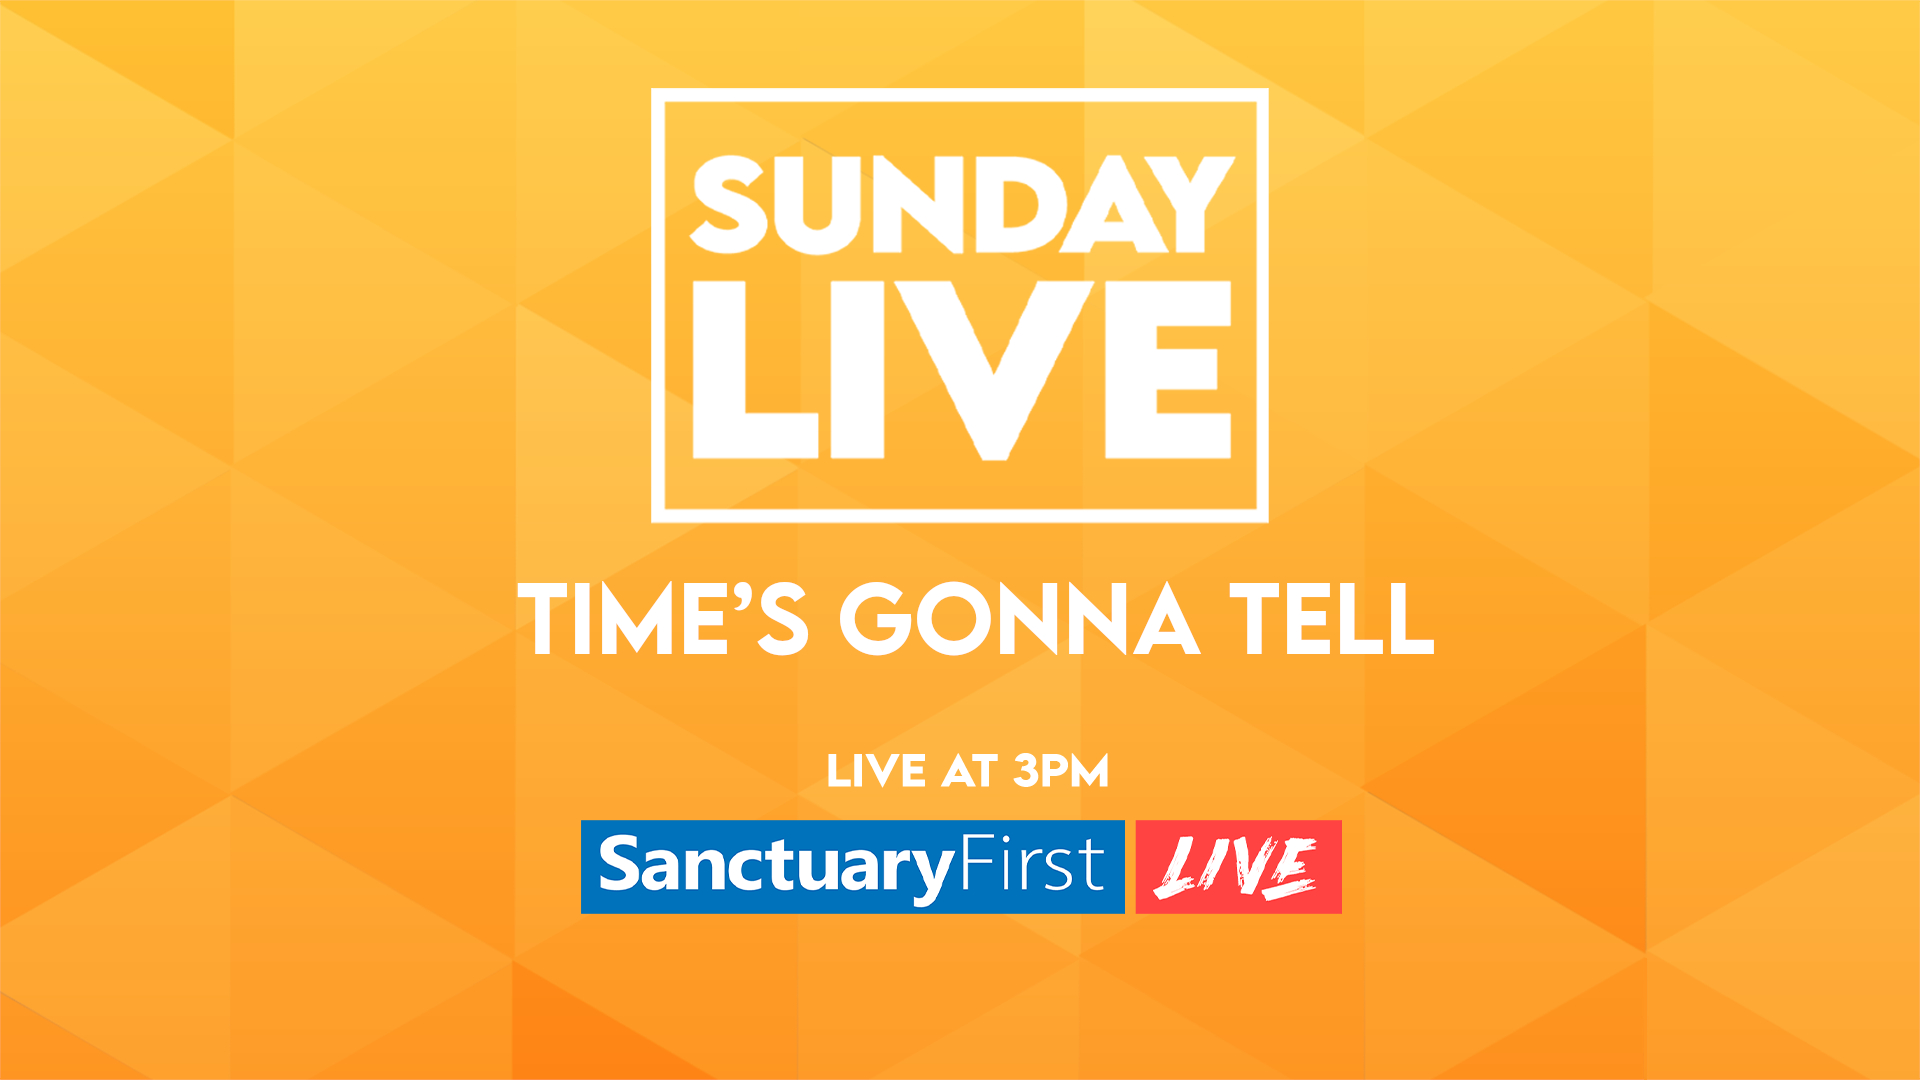 Sunday Live - Time’s Gonna Tell